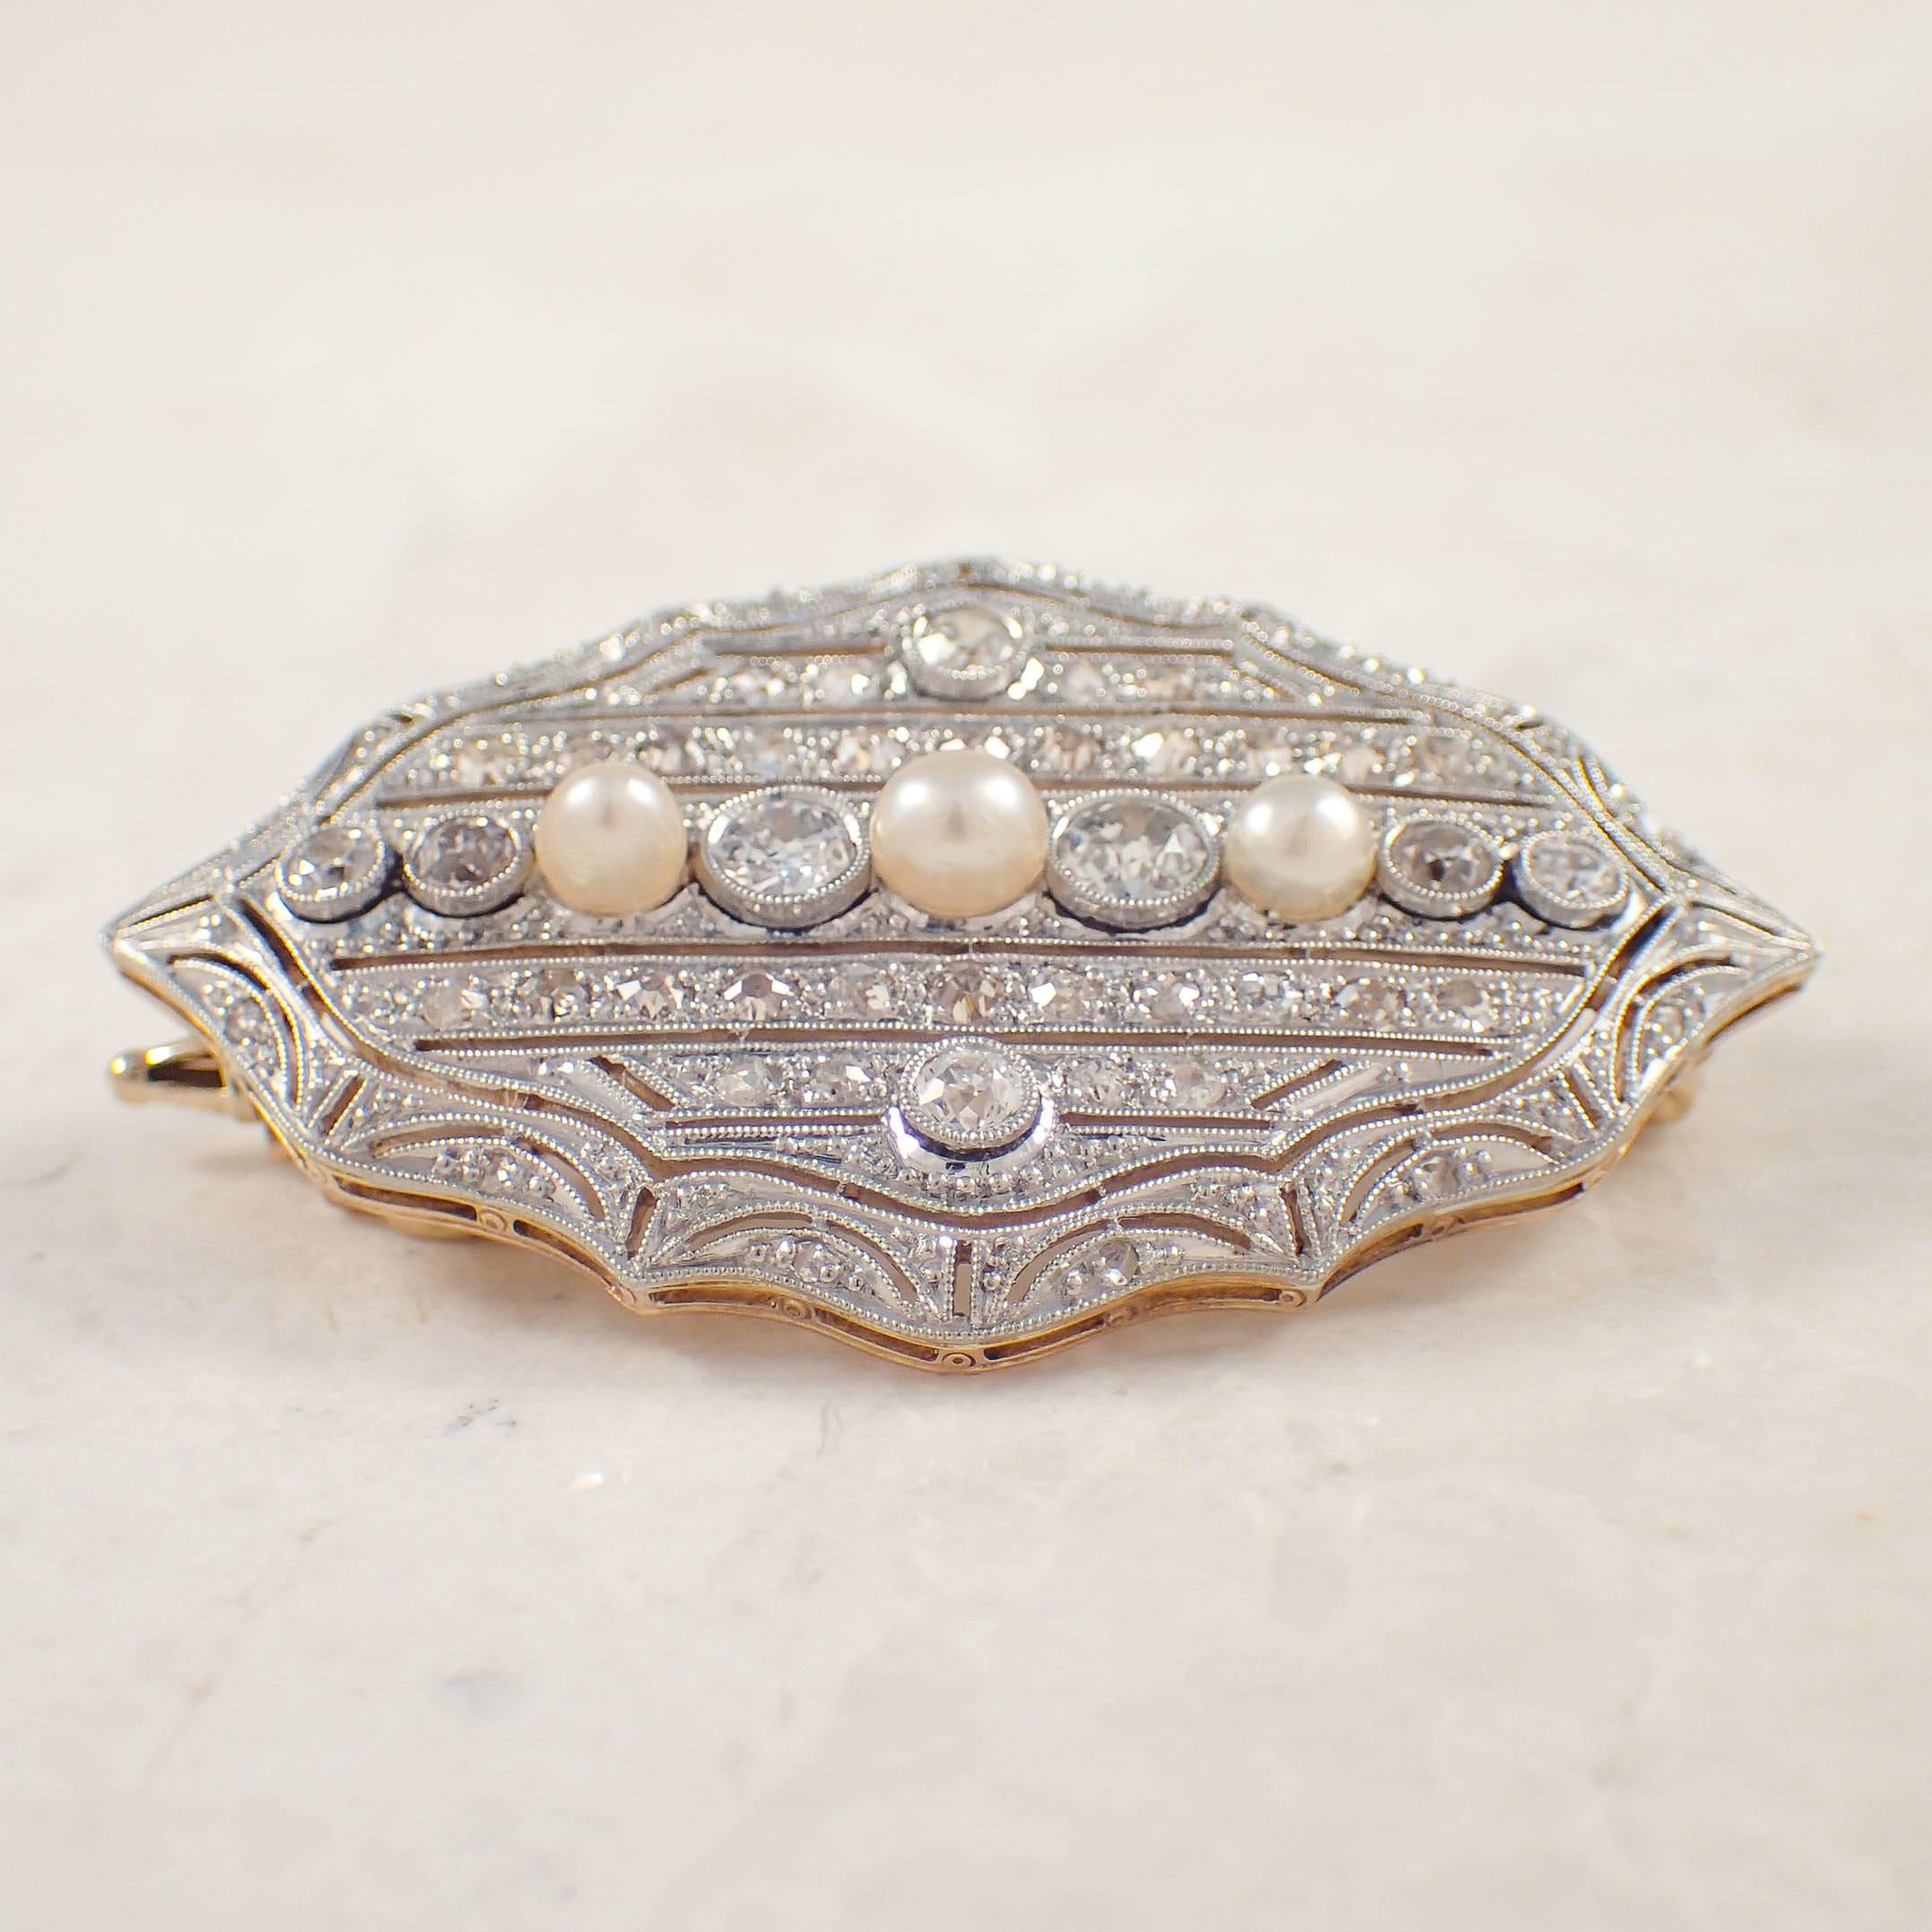 Edwardian platinum over gold pearl and diamond pin/ pendant. The shield shaped, open work pin/ pendant is set with 3 pearls, and 50 old mine and rose cut diamonds weighing approximately 1.50 carats total.  The pendant measures 1.75 X 1 inch, and